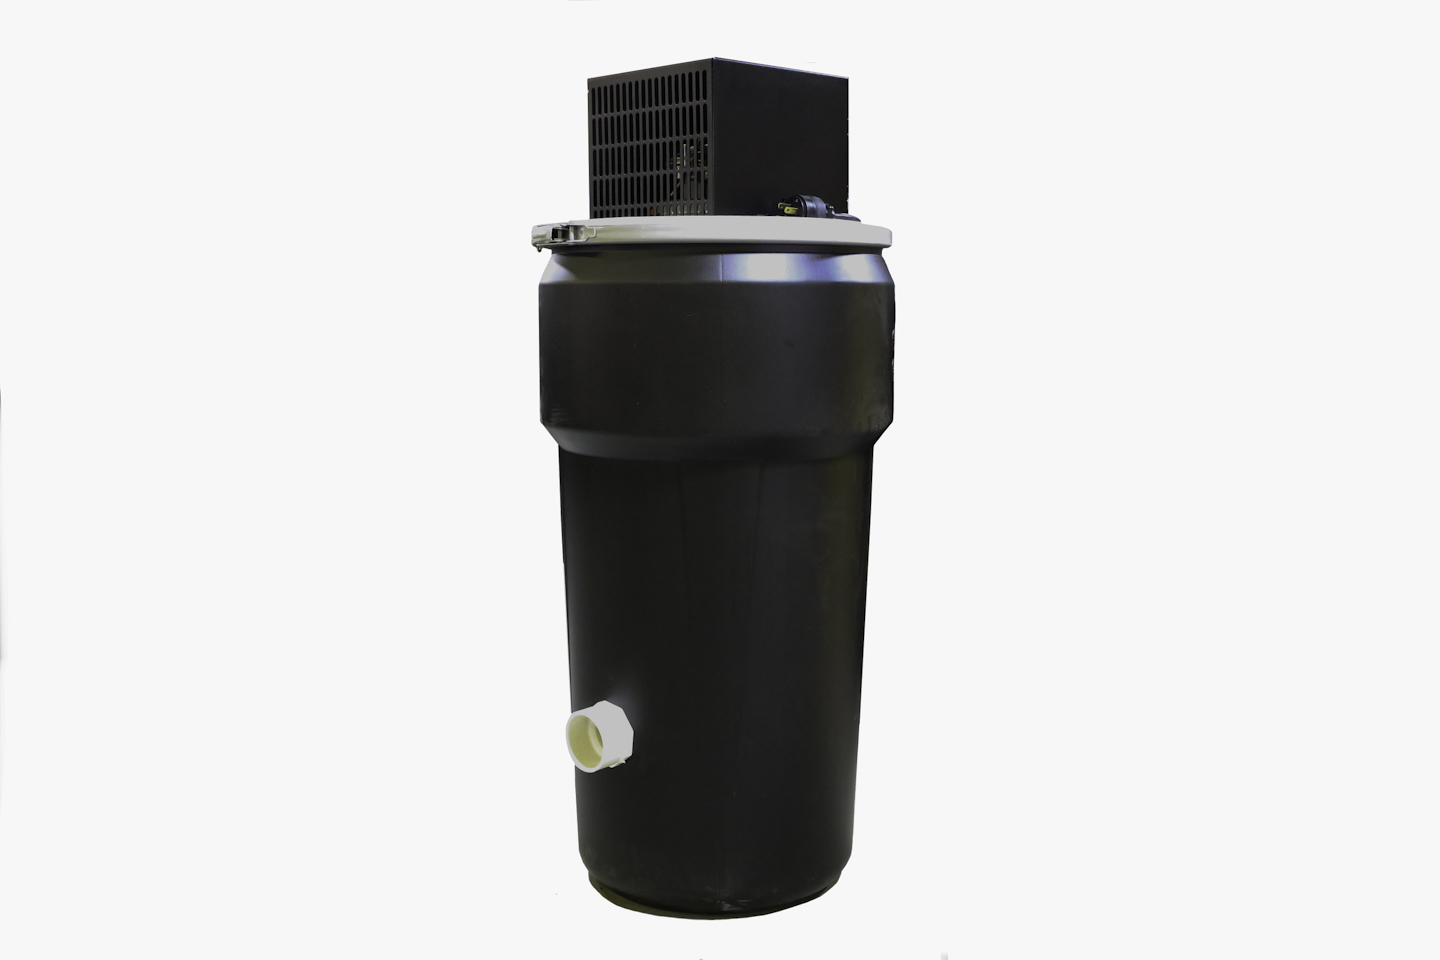 Single Cartridge Filter Dust Collector